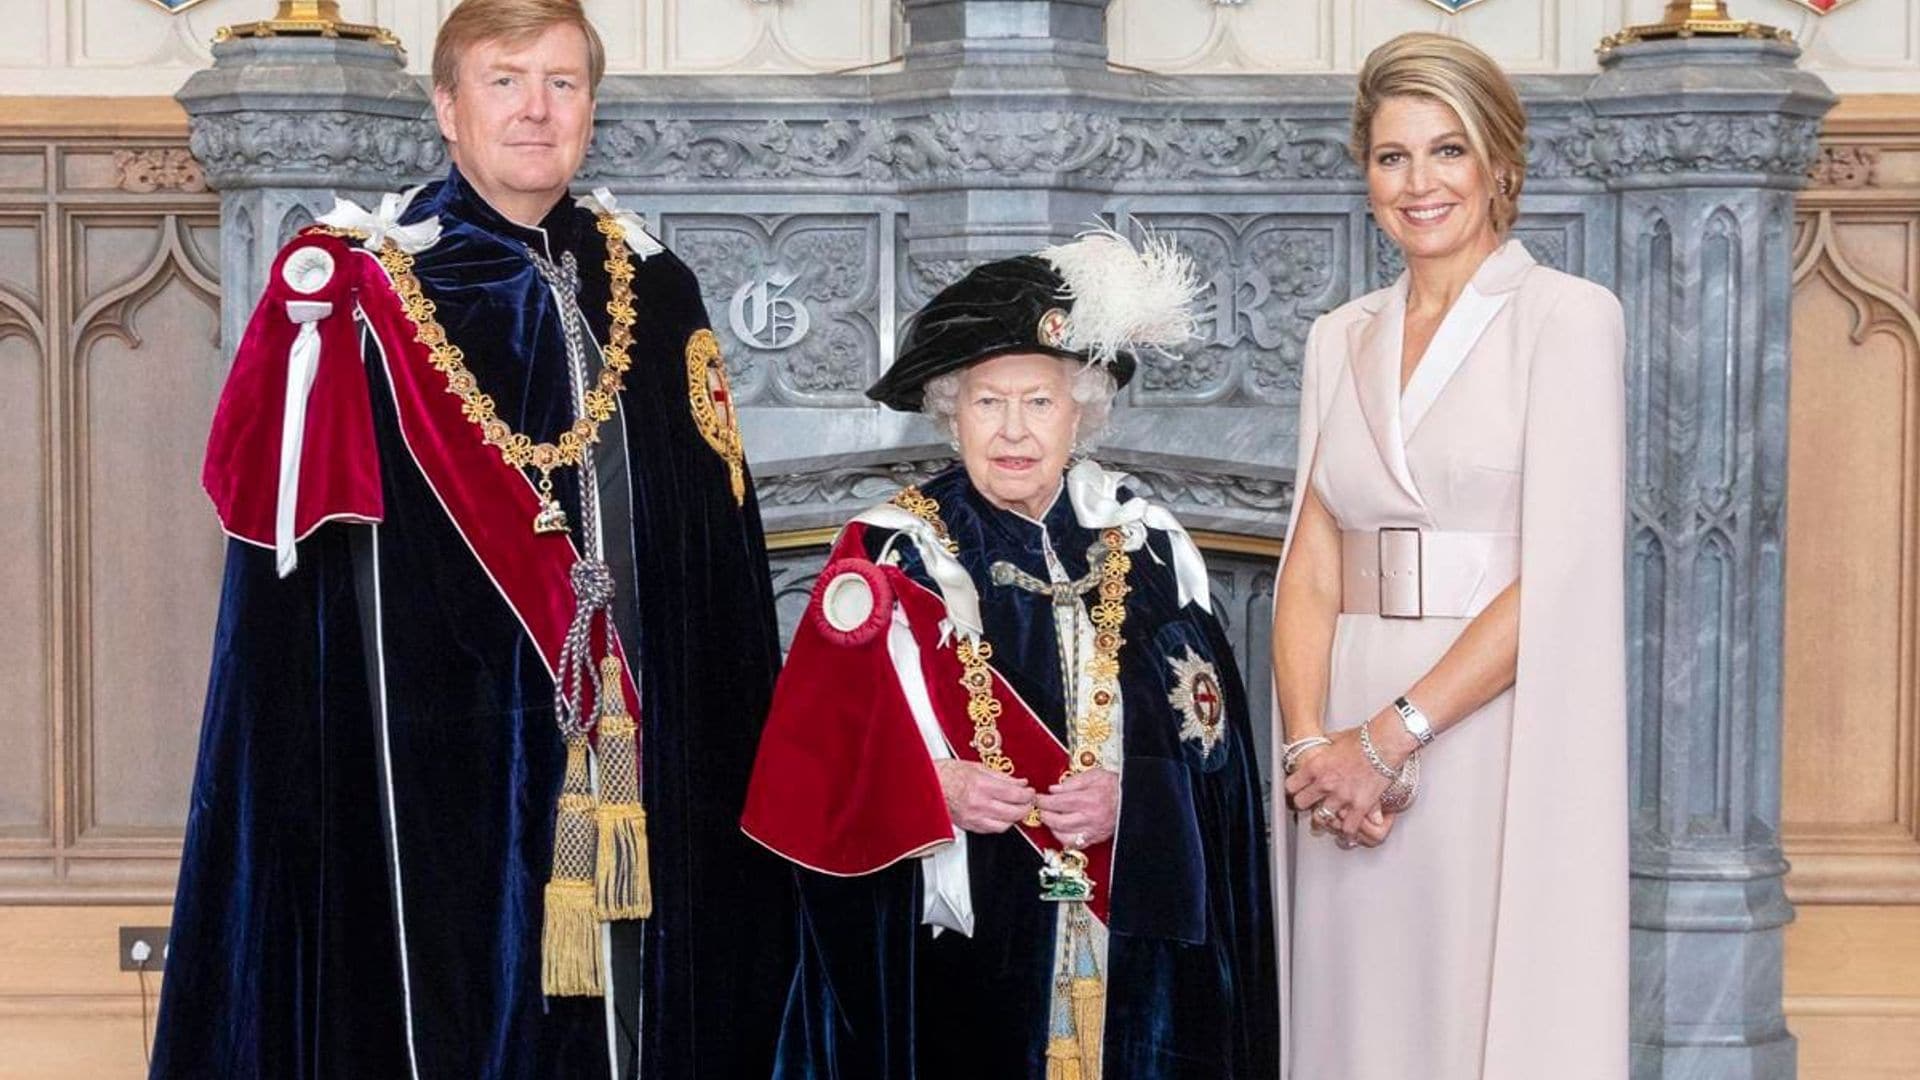 Queen Maxima and King Willem-Alexander remember Queen Elizabeth 'with deep respect and great affection'